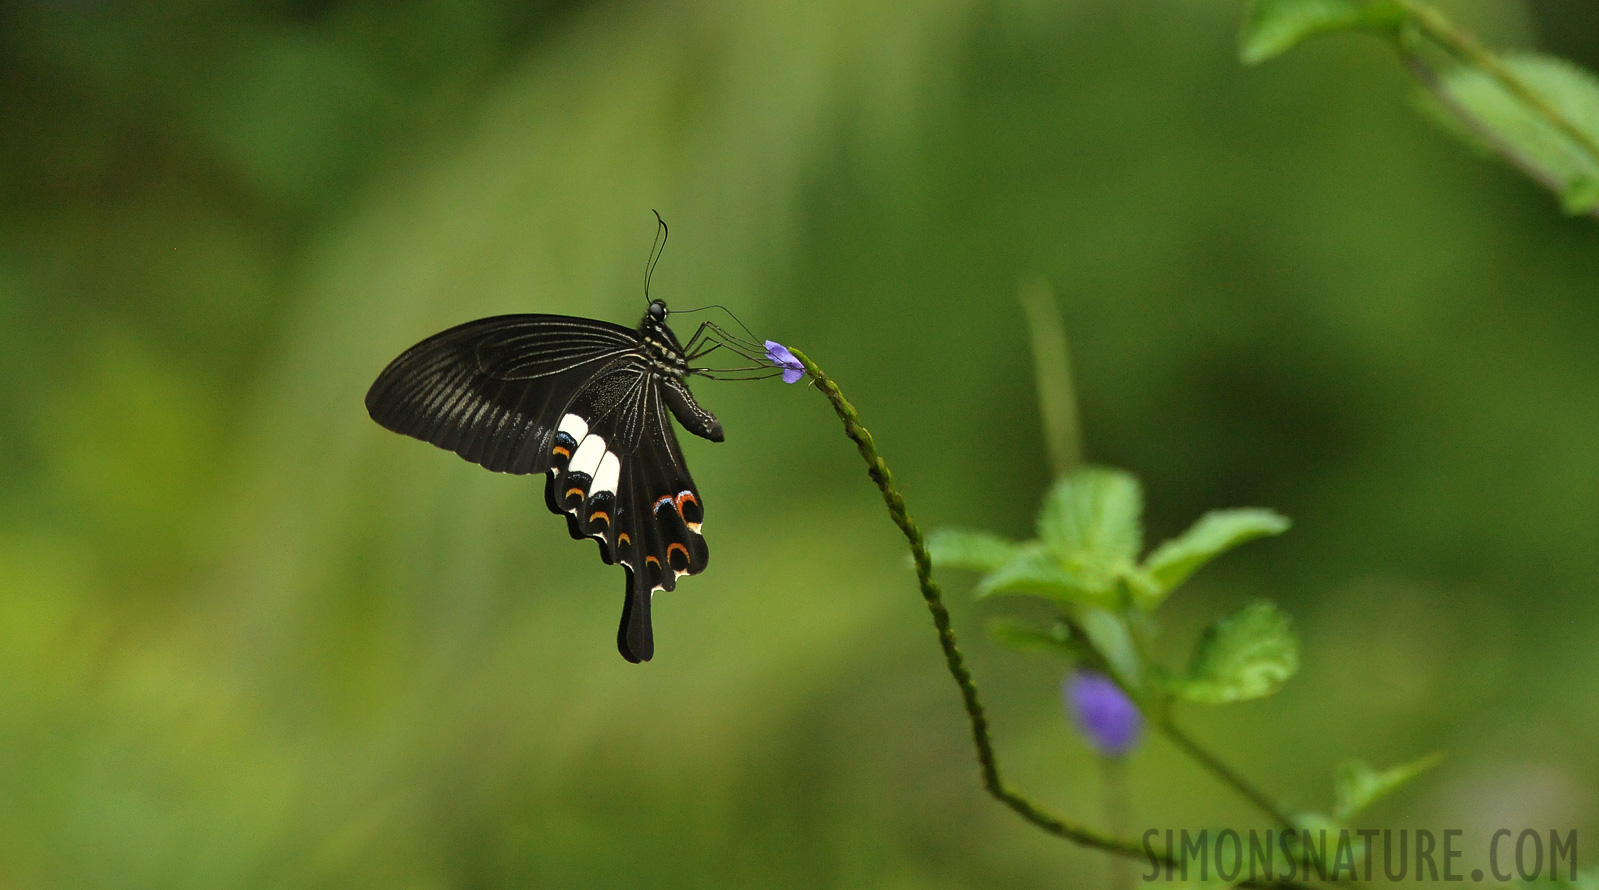 Papilio helenus [550 mm, 1/1250 sec at f / 8.0, ISO 4000]